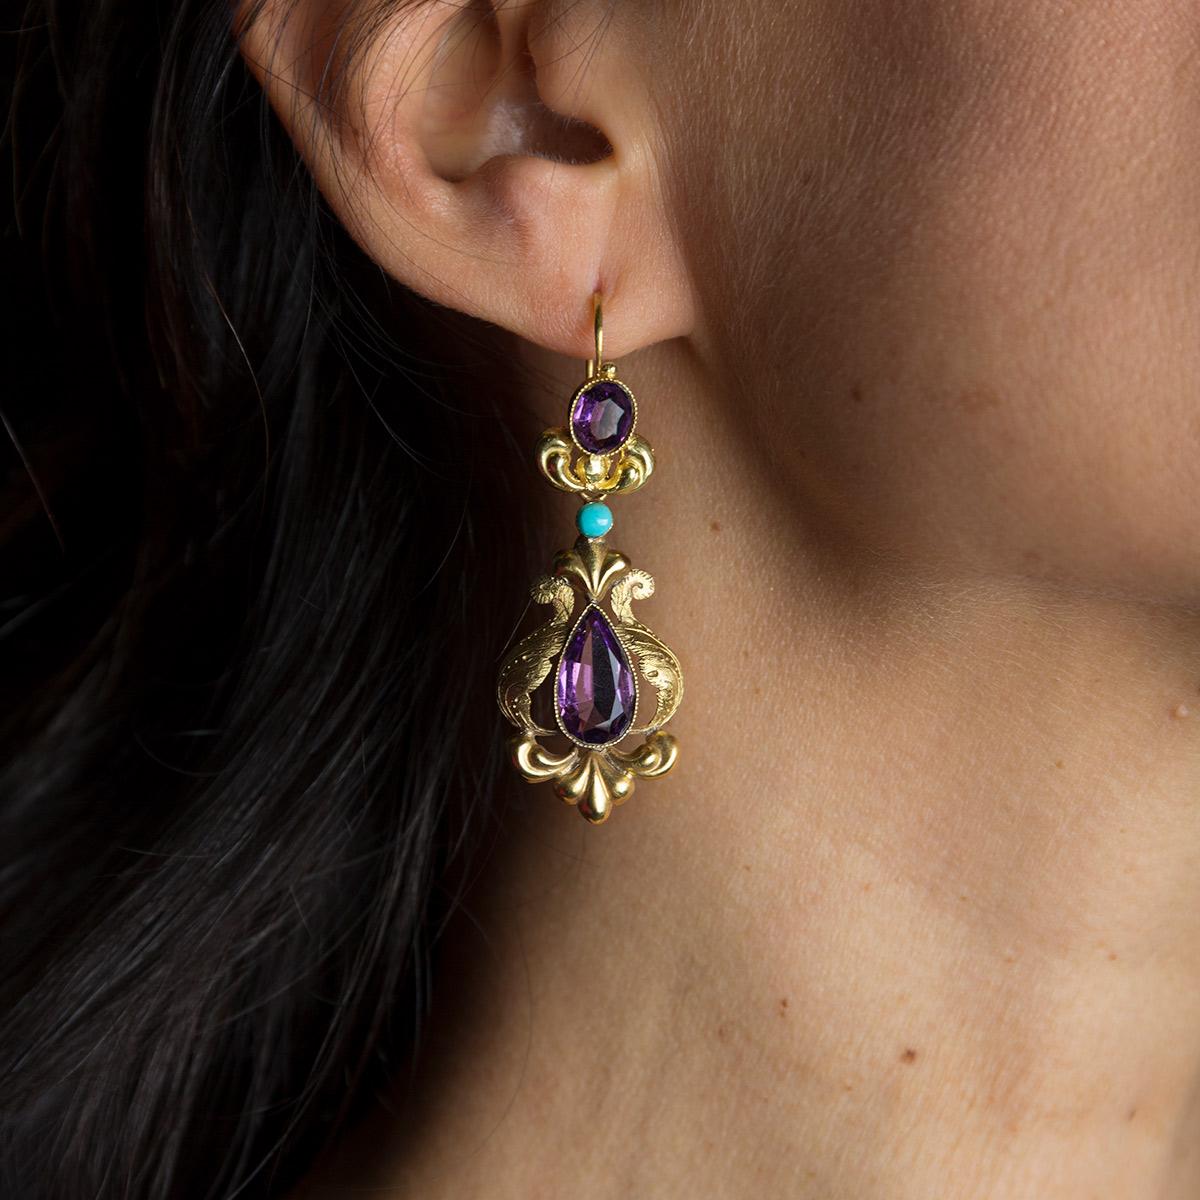 Women's 18 Kt Gold Antique Earrings with Amethysts and Turquoise, Sicily, Early 1900s For Sale